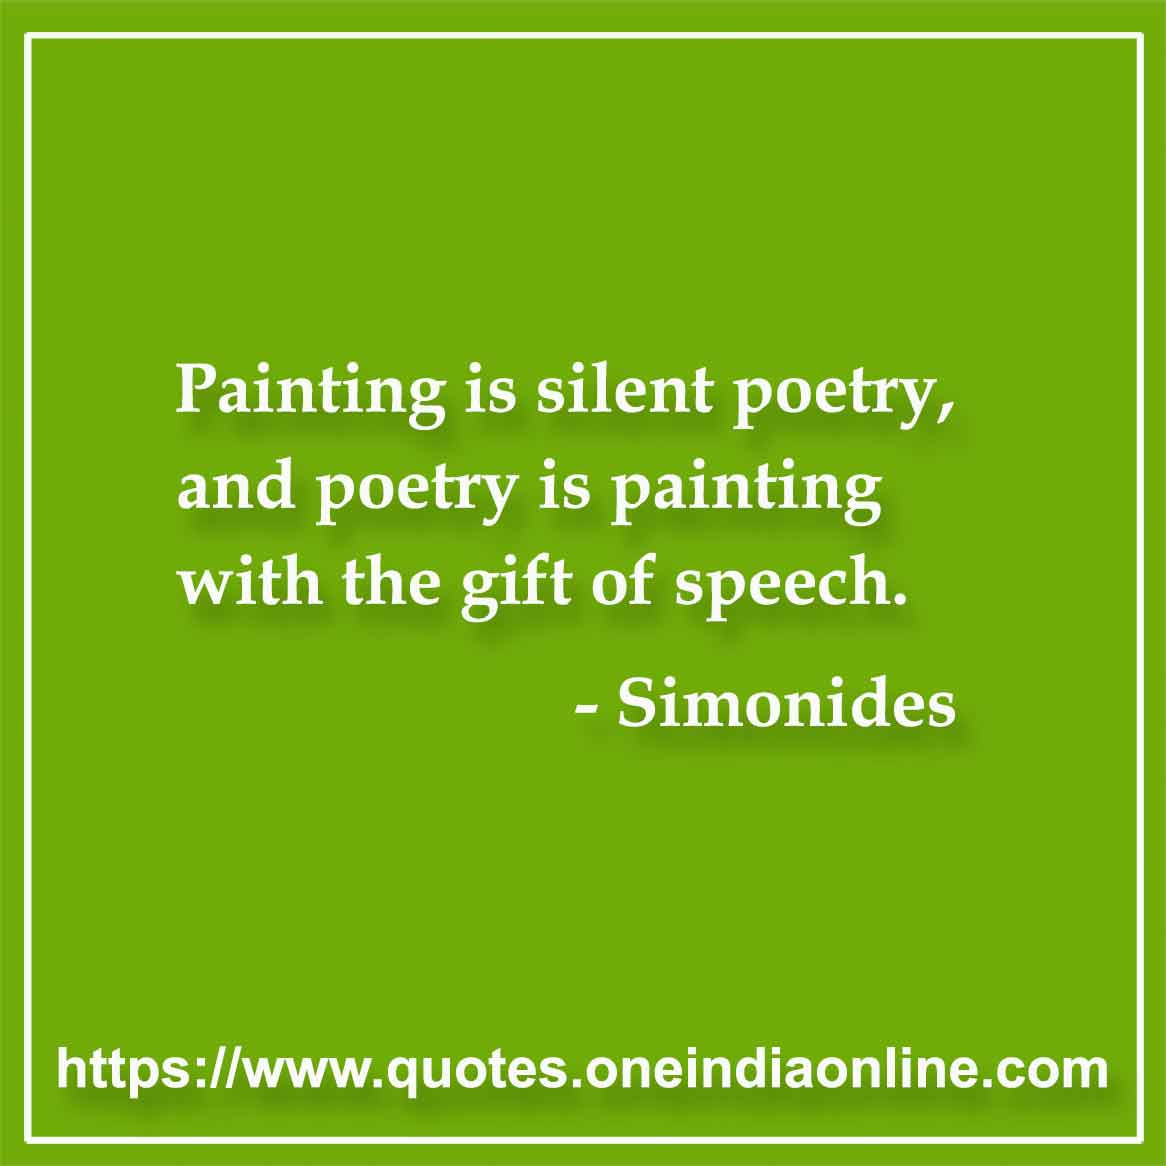 Painting is silent poetry, and poetry is painting with the gift of speech. 

- Simonides Quotes